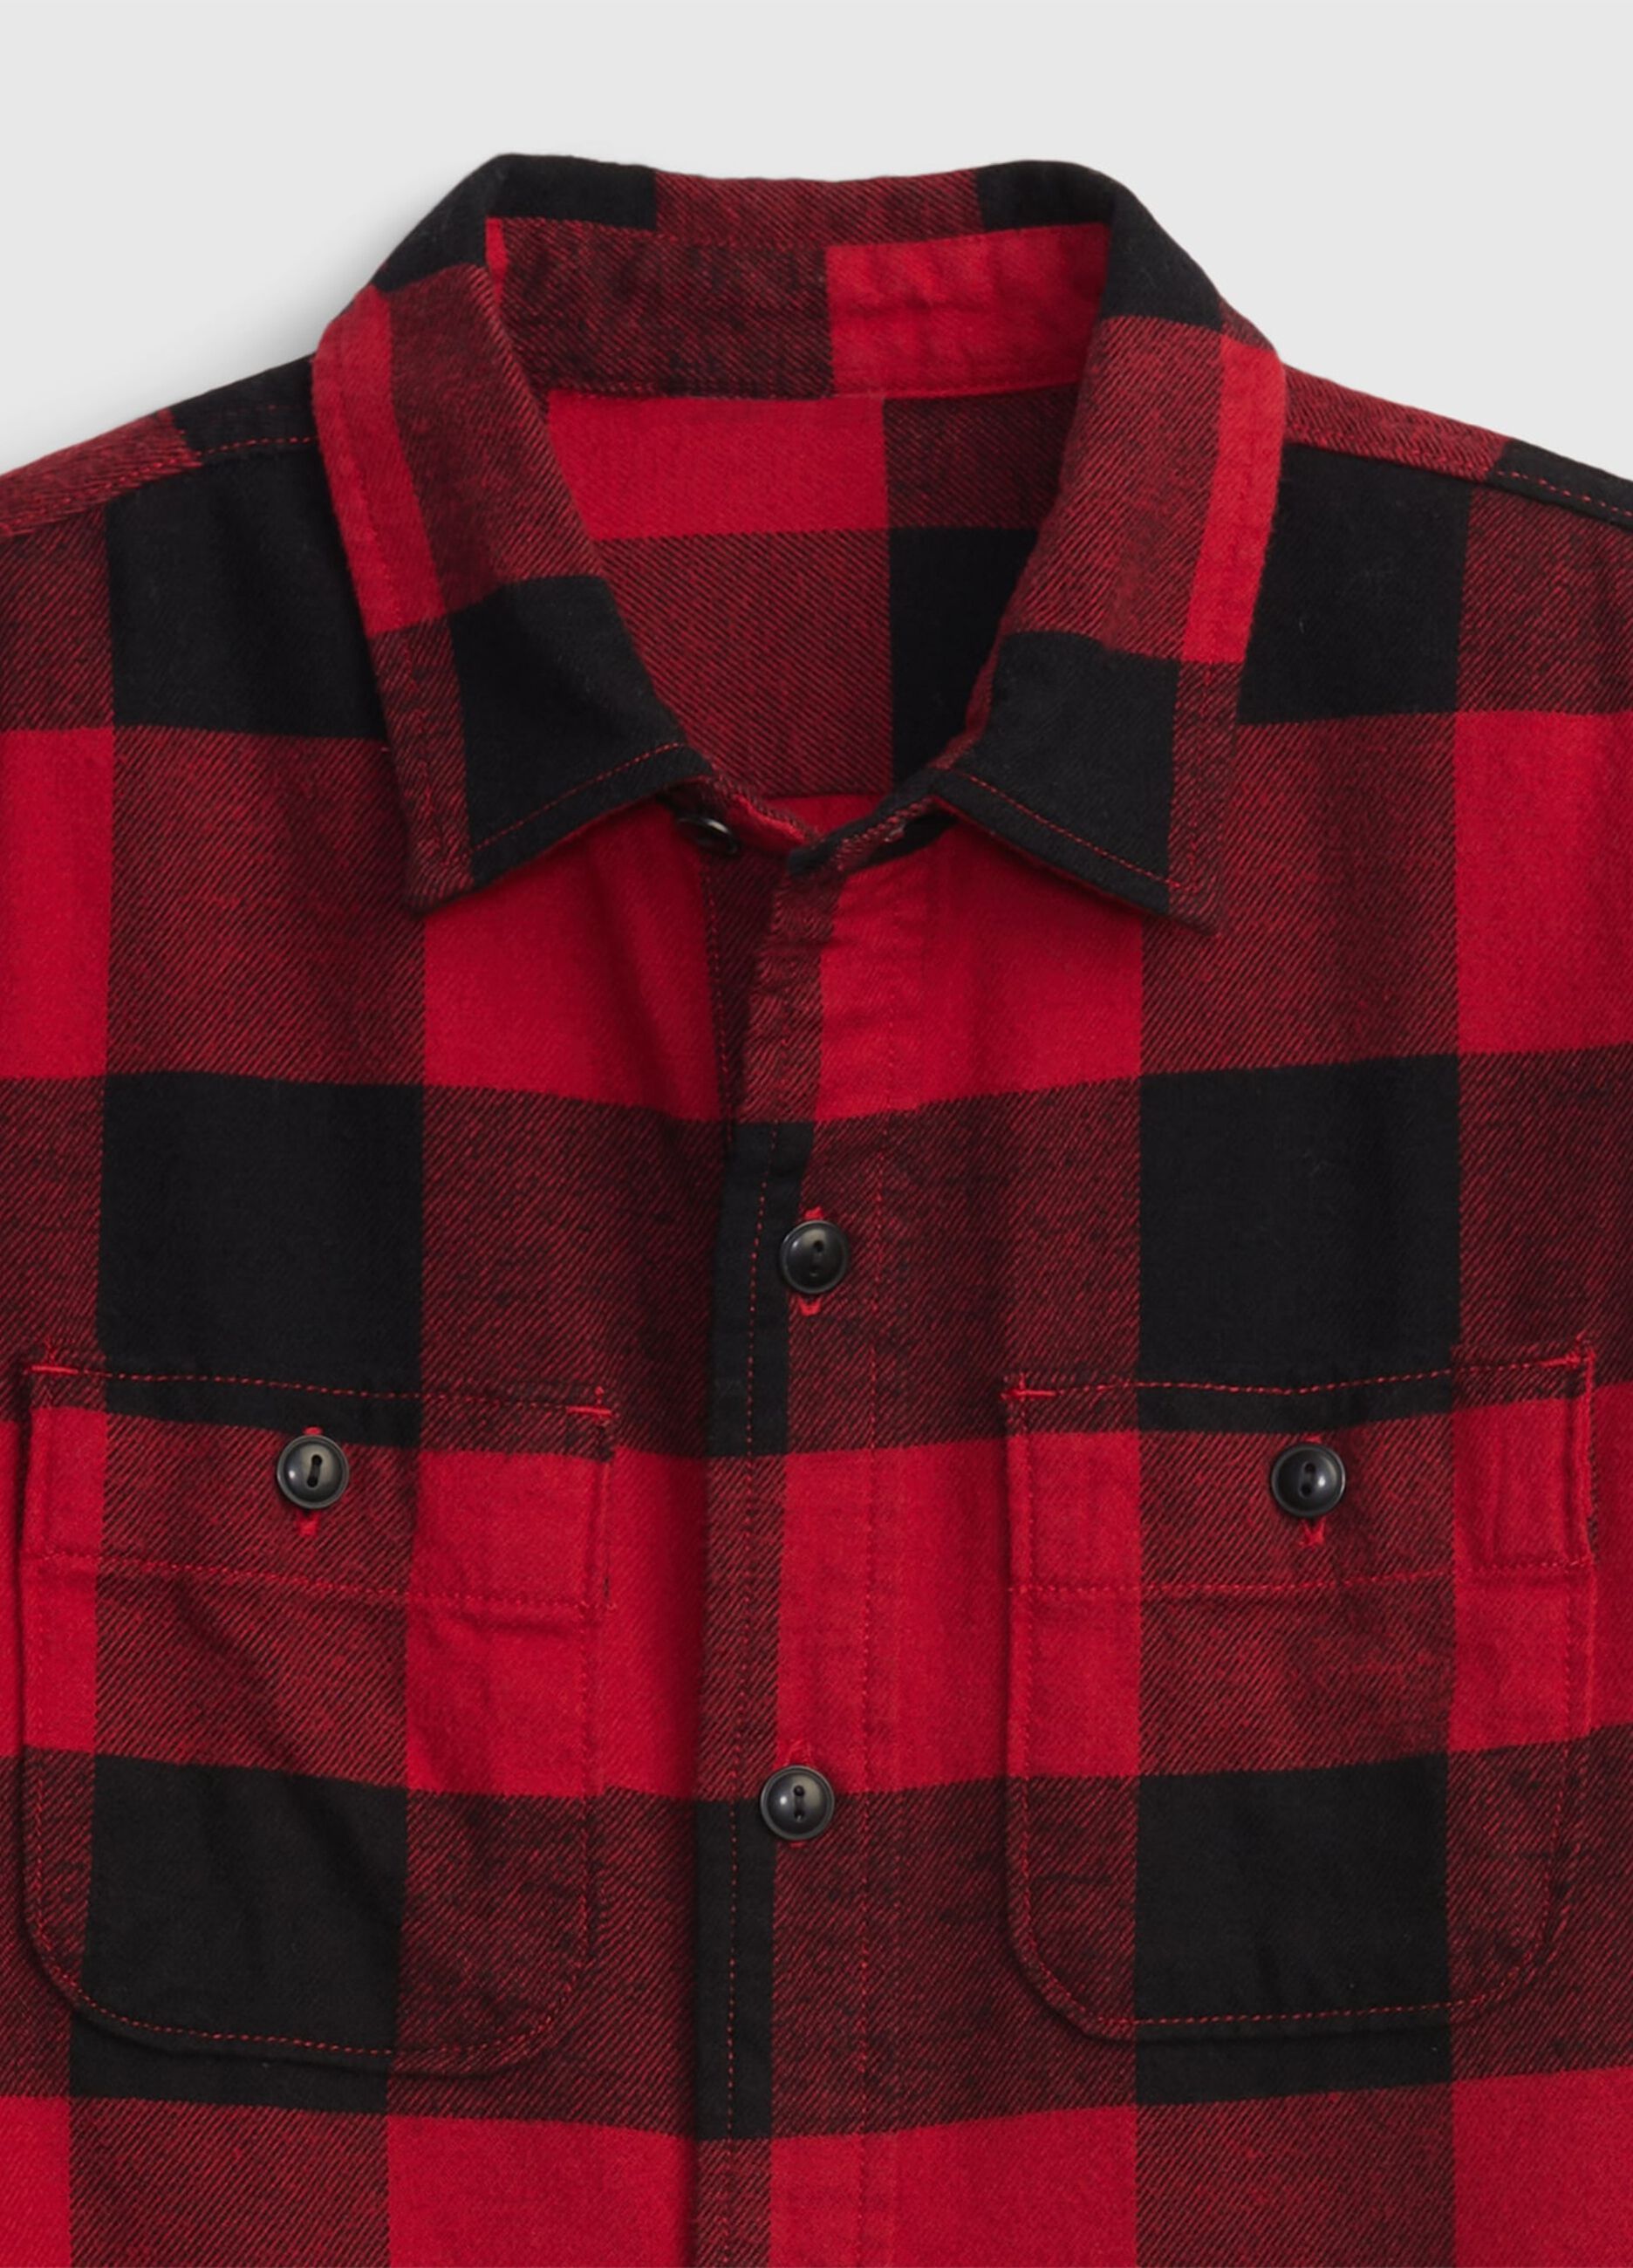 Flannel shirt with check pattern